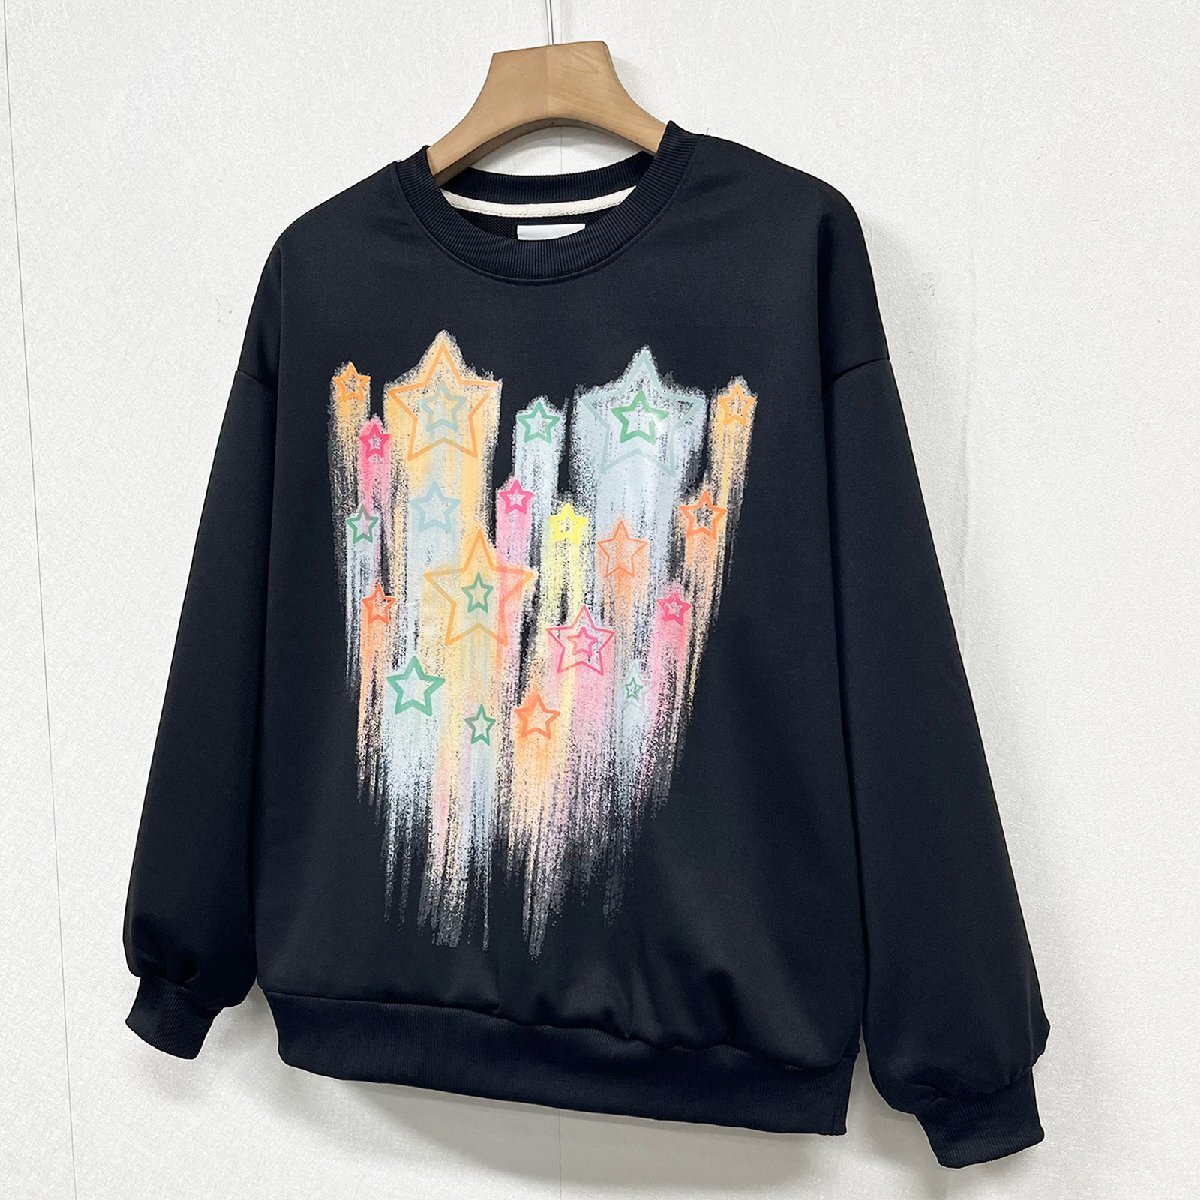  piece . Europe made * regular price 4 ten thousand * BVLGARY a departure *RISELIN sweatshirt on goods comfortable ventilation colorful star pattern tops sweat leisure spring summer L/48